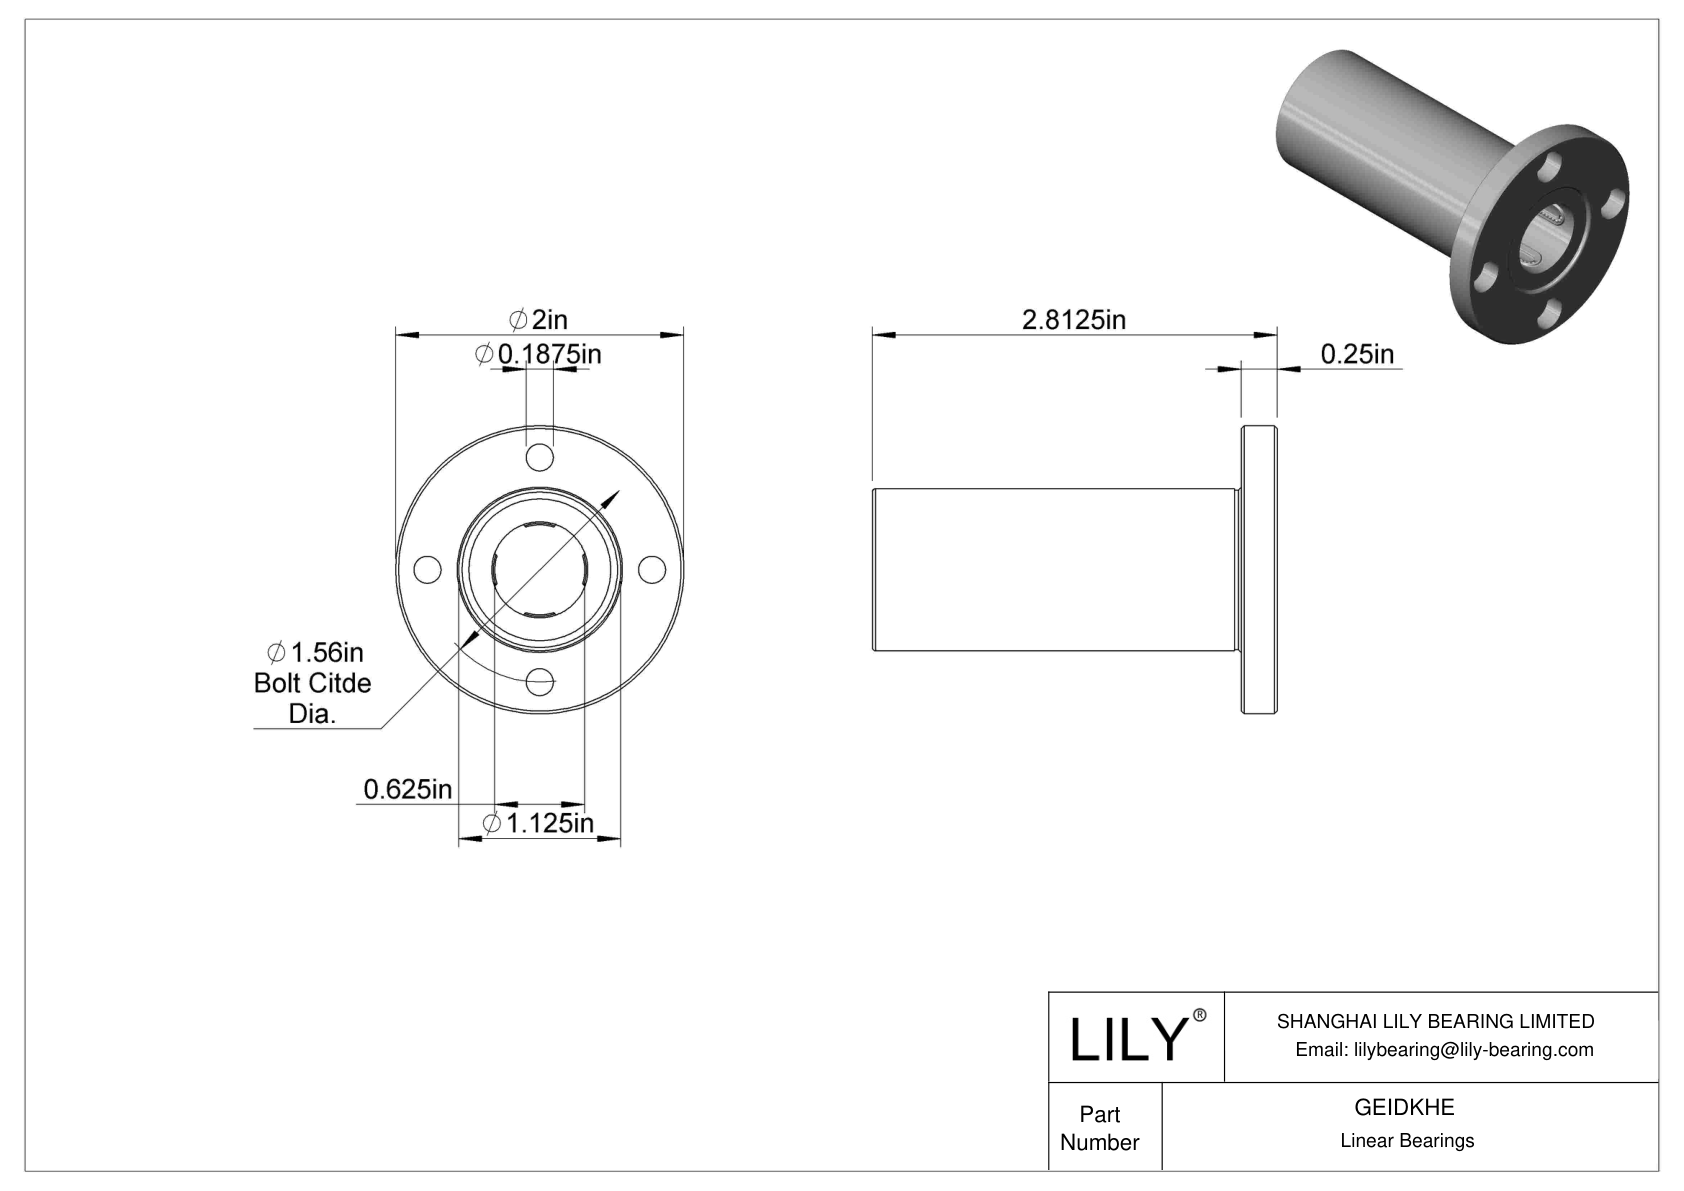 GEIDKHE Flange-Mounted Linear Ball Bearings cad drawing